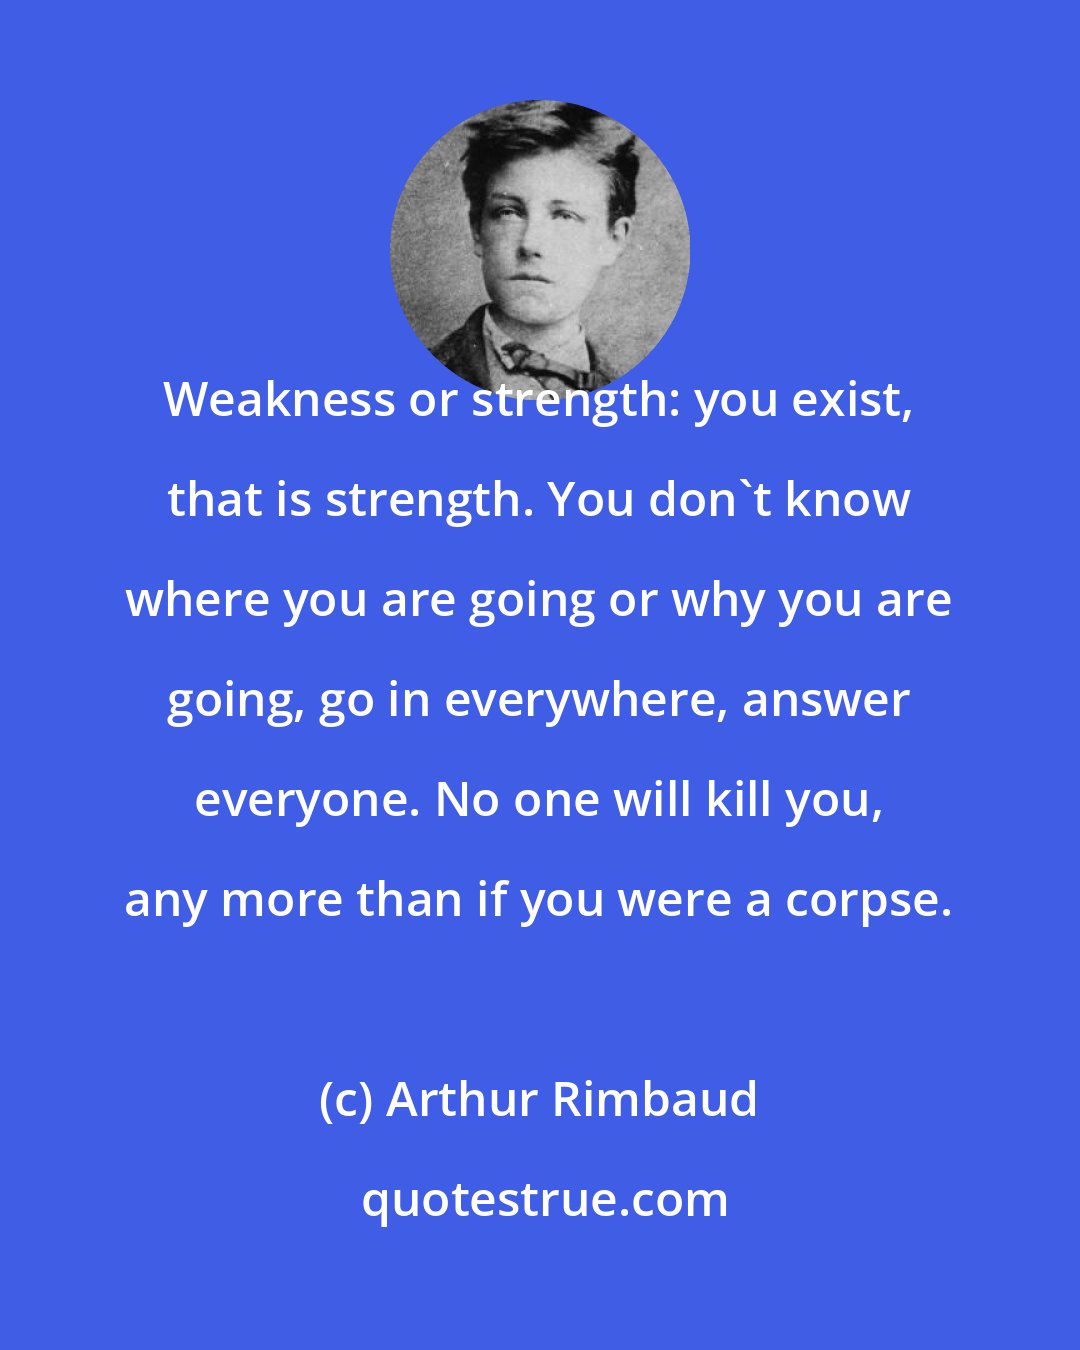 Arthur Rimbaud: Weakness or strength: you exist, that is strength. You don't know where you are going or why you are going, go in everywhere, answer everyone. No one will kill you, any more than if you were a corpse.